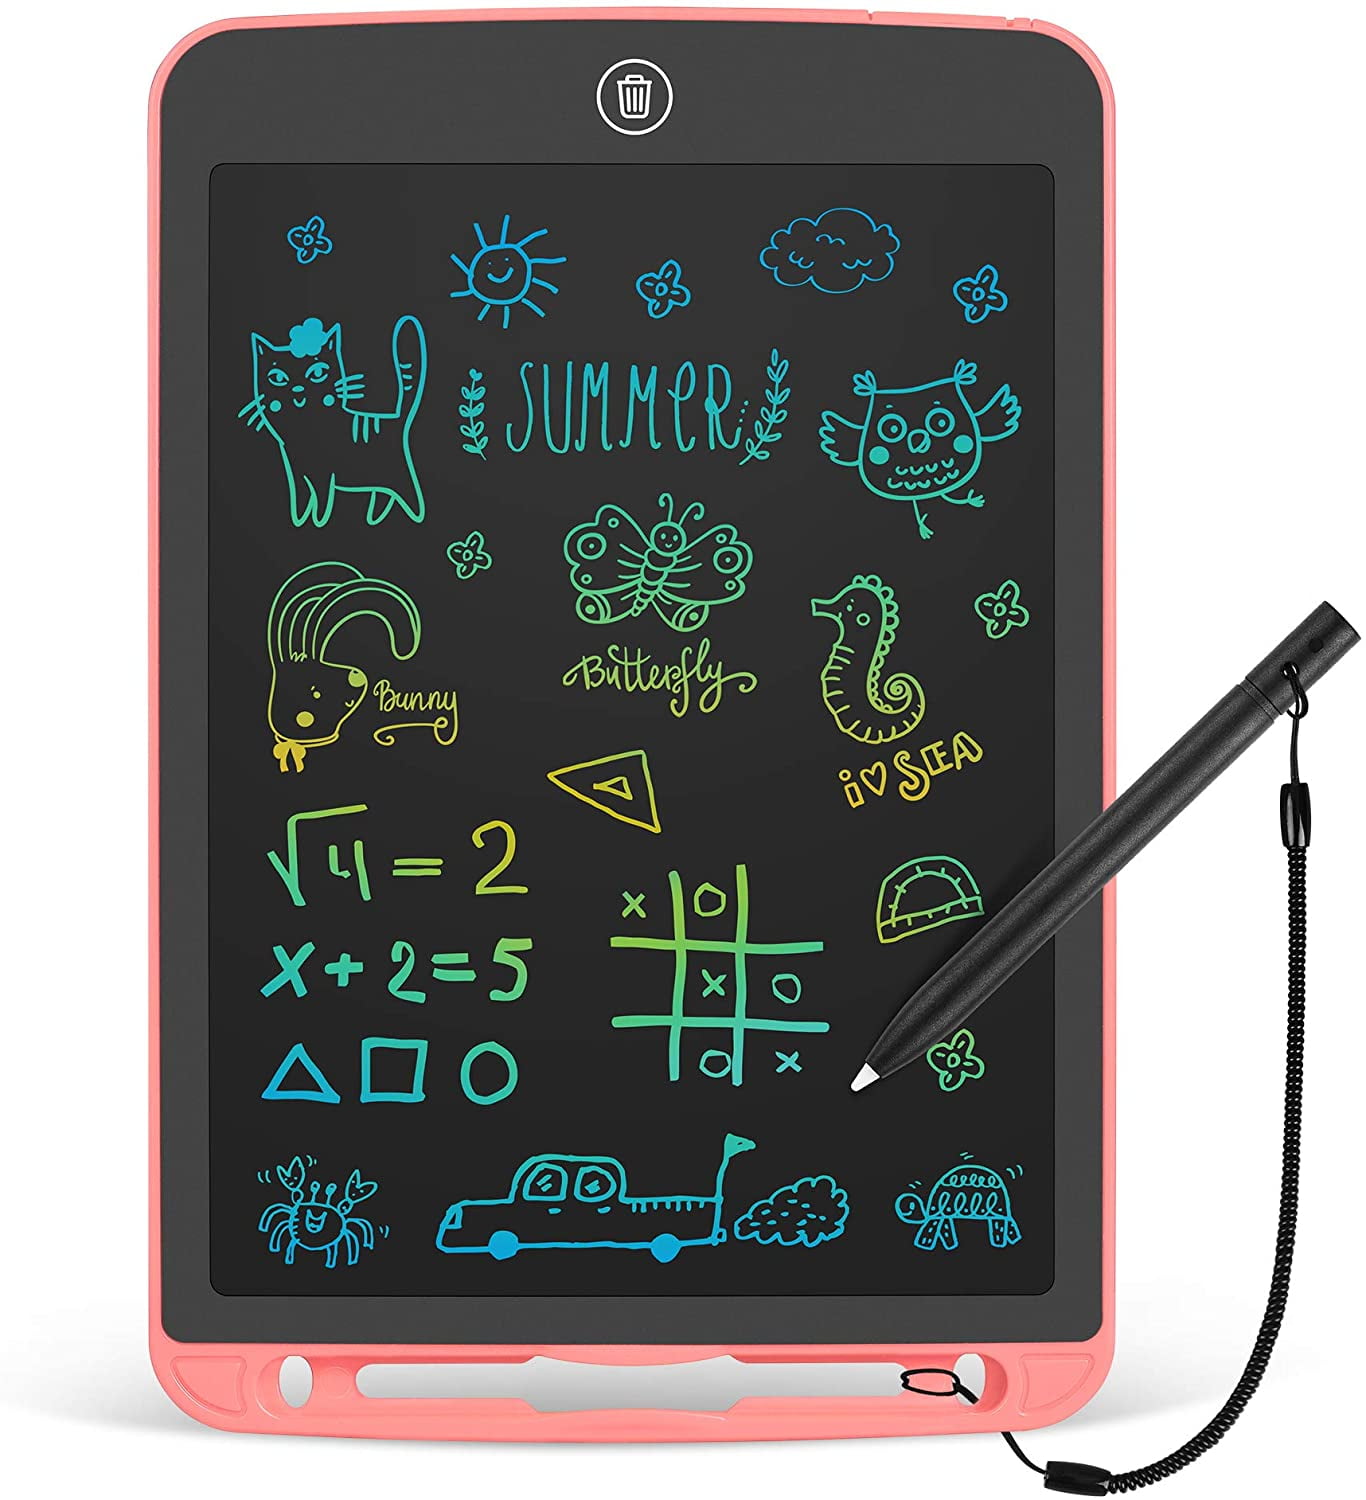 Green LCD Writing Tablet 12 Inch Toddler Doodle Board Educational and Learning Kids Toy for 2 3 4 5 6 Year Old Boys and Girls Gifts Colorful Drawing Tablet Erasable Electronic Painting Pads